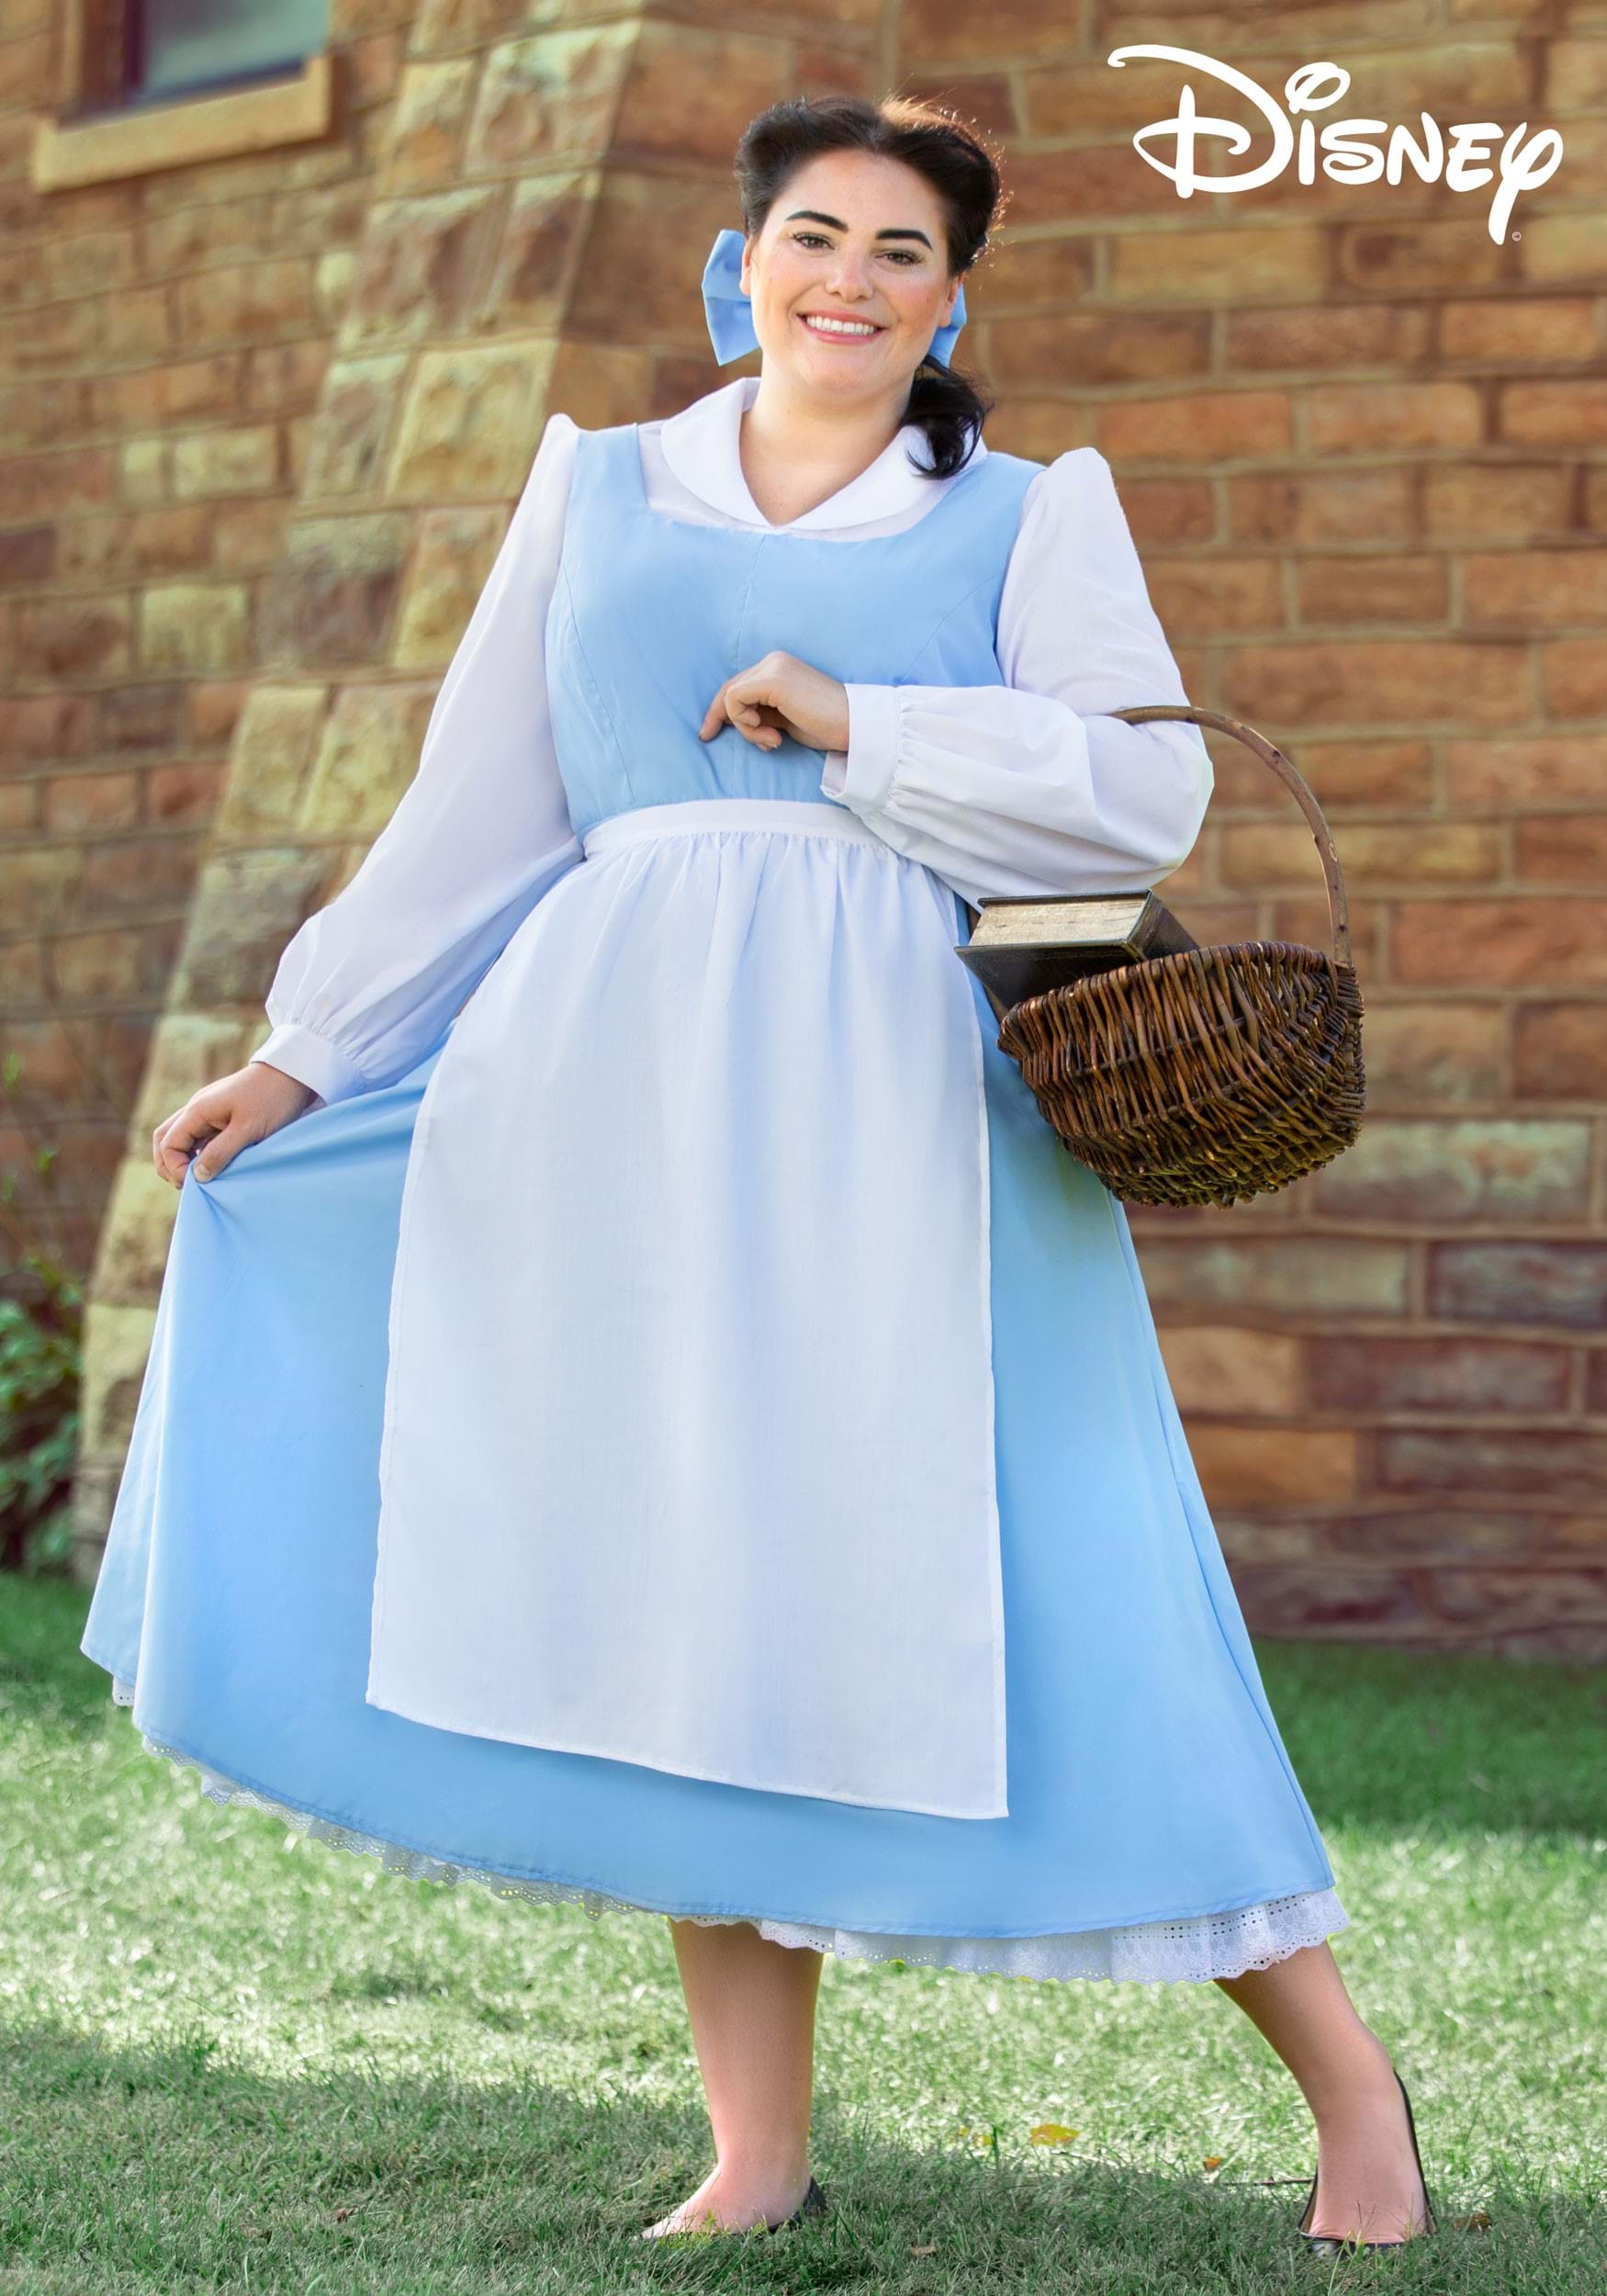 Disney Inspired, Belle Dress Adult, Belle Costume Adult, Beauty and the  Beast Costume, Belle Adult, Belle Yellow Costume, Made to Order, 